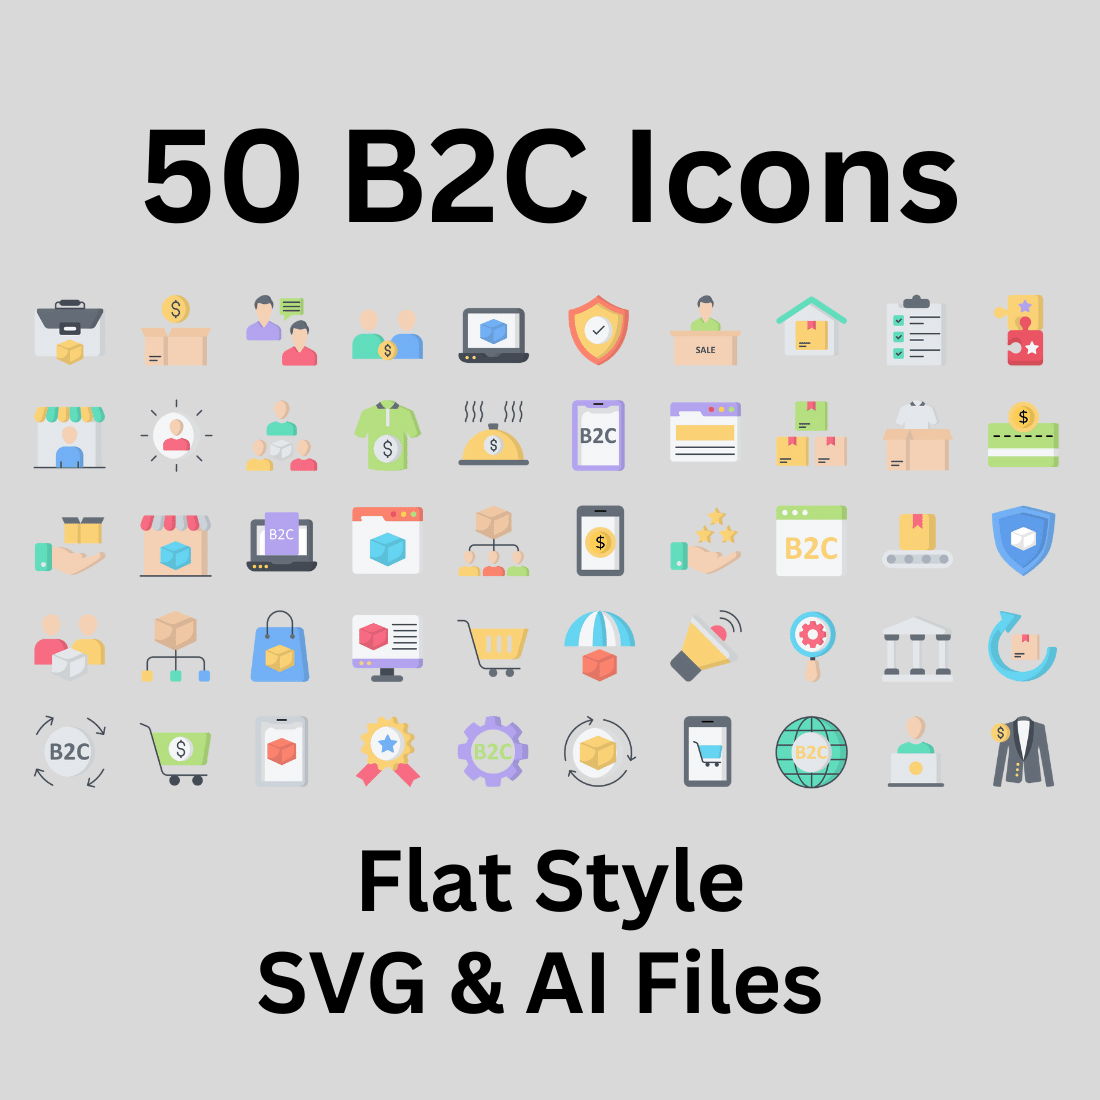 B2C Icon Set 50 Flat Icons - SVG And AI Files preview image.